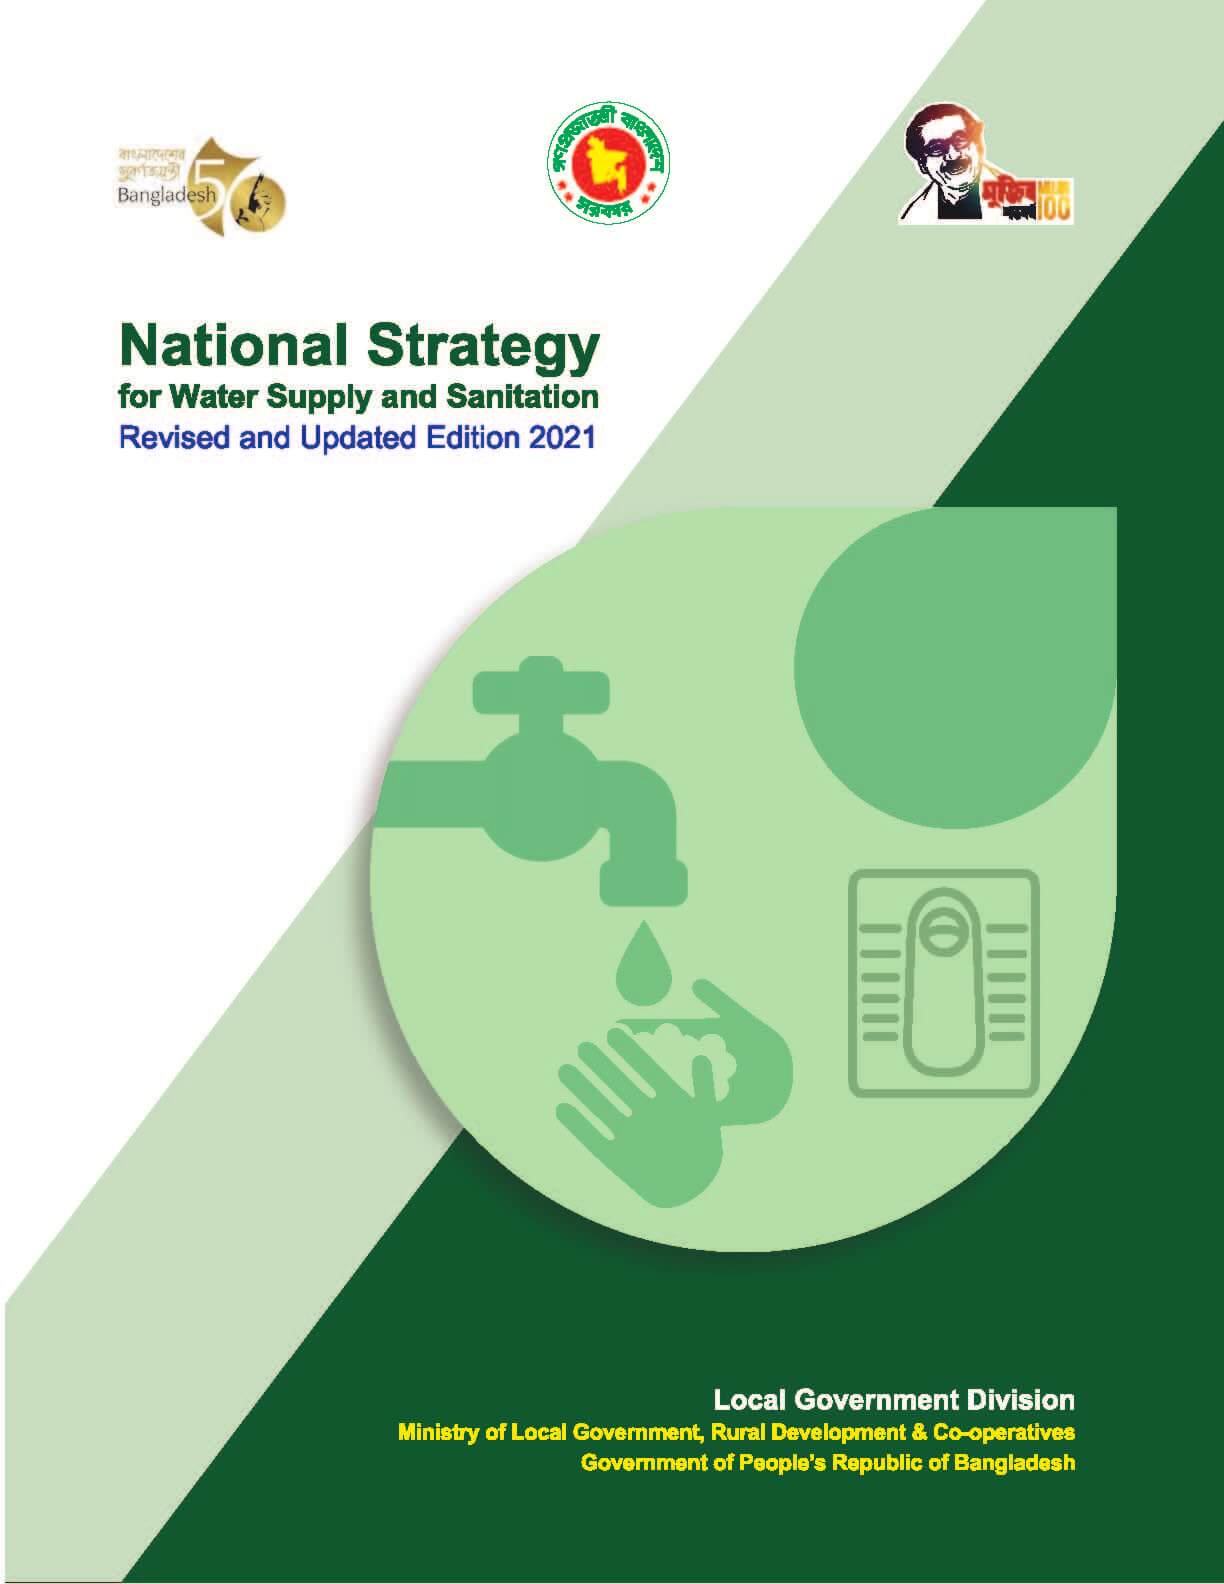 National Strategy for Water Supply and Sanitation-Revised and Updated Edition 2021